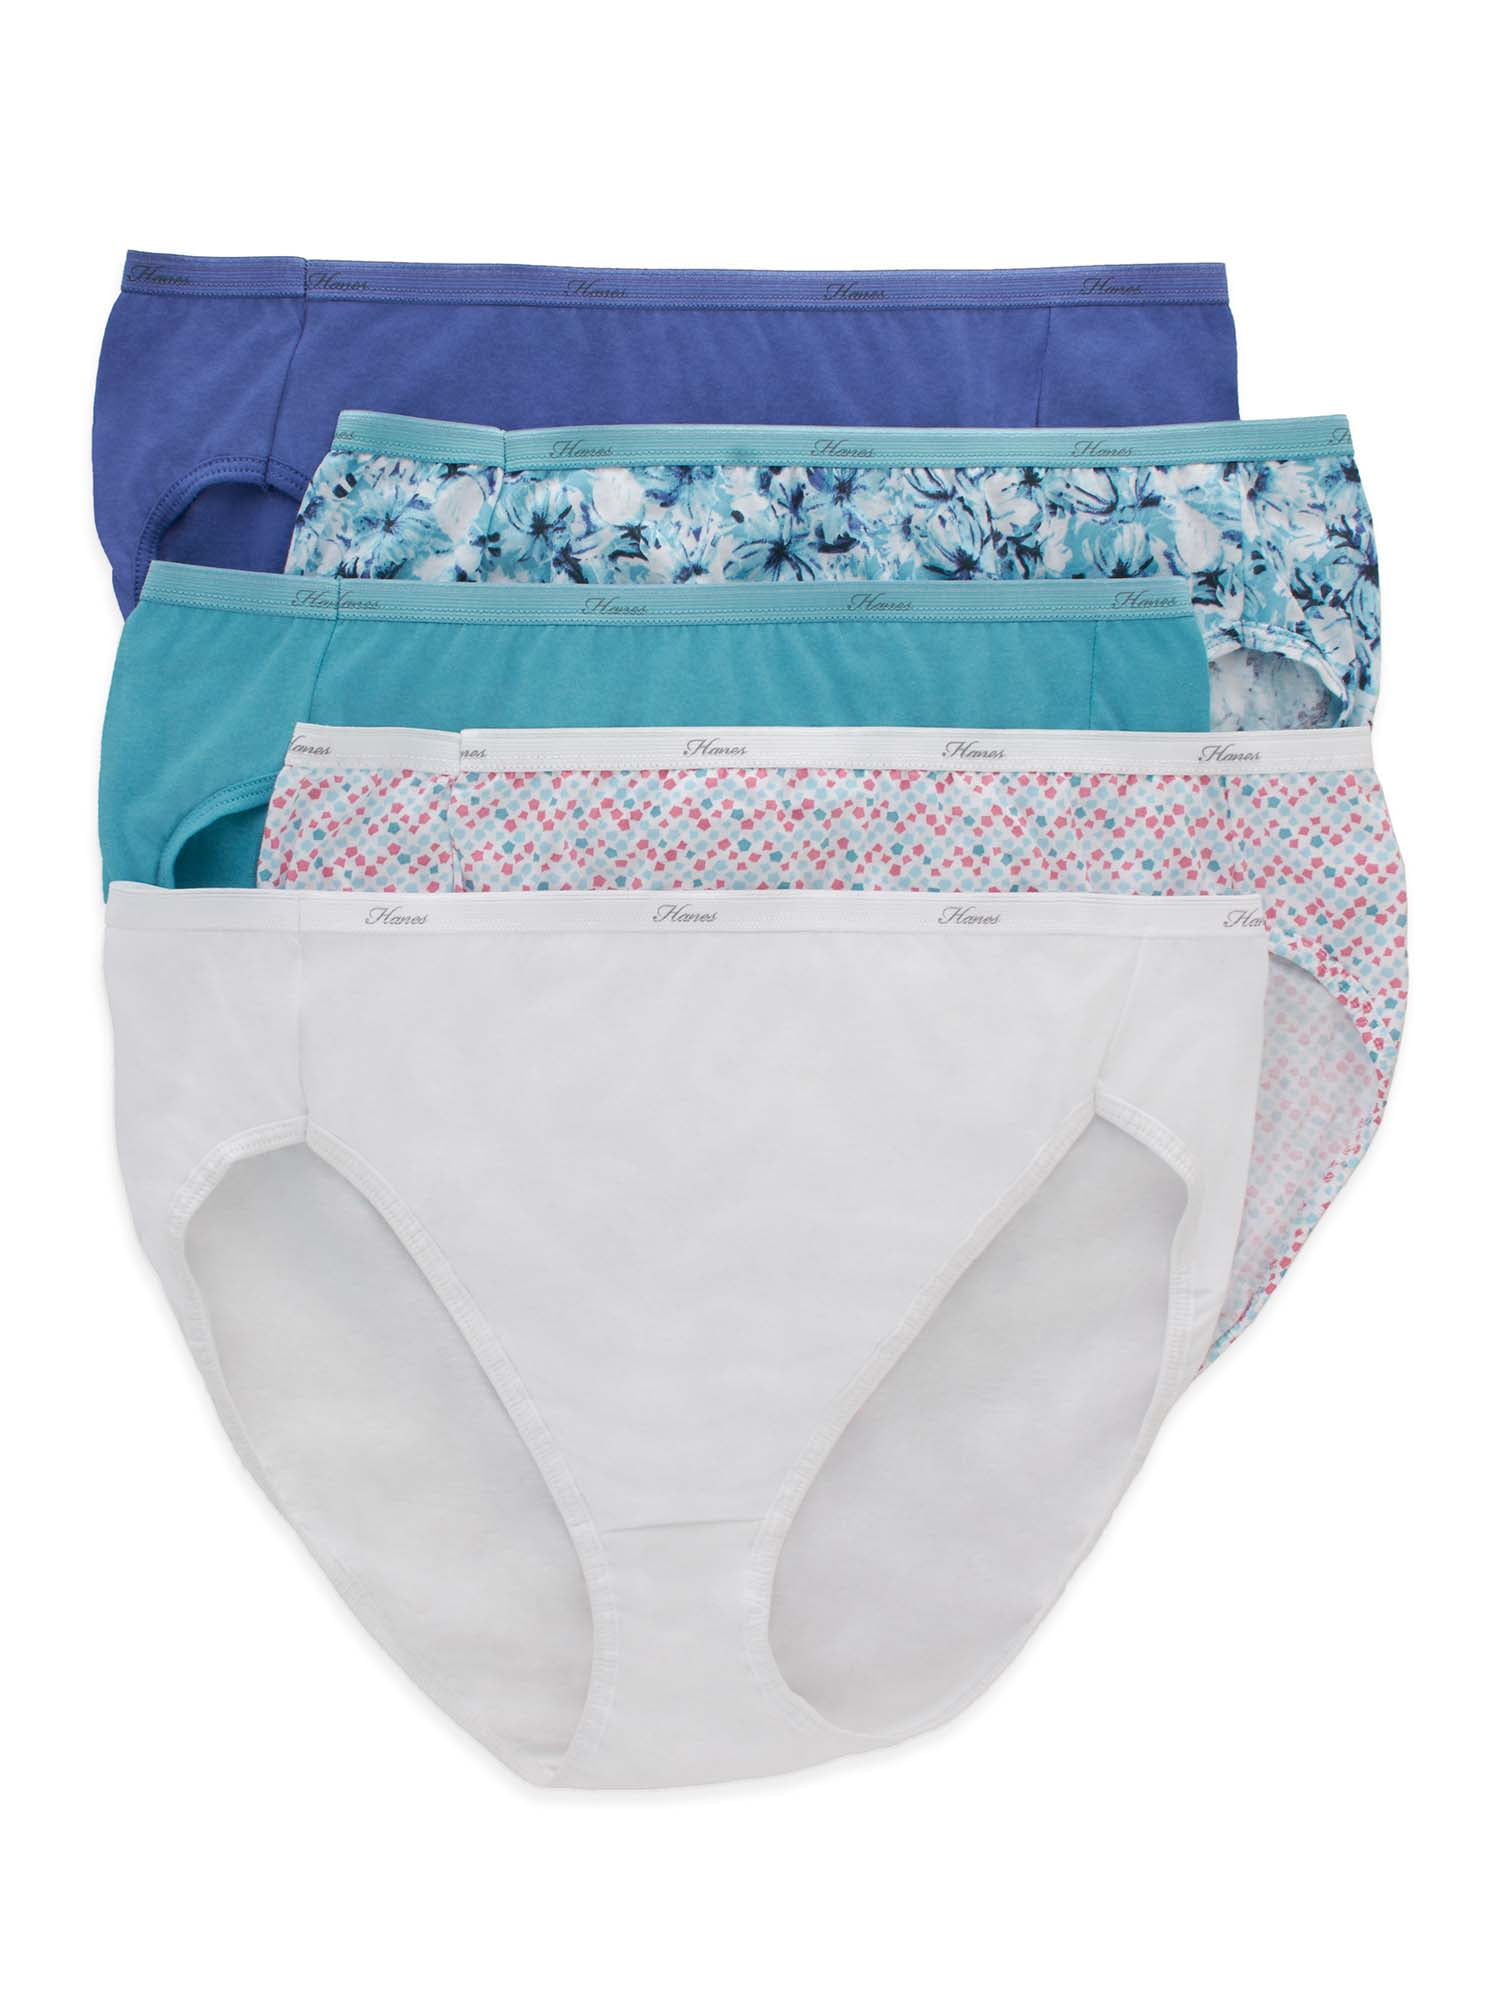 Available in Regular and Plus Sizes Hanes Womens Cotton Hi Cut Underwear 